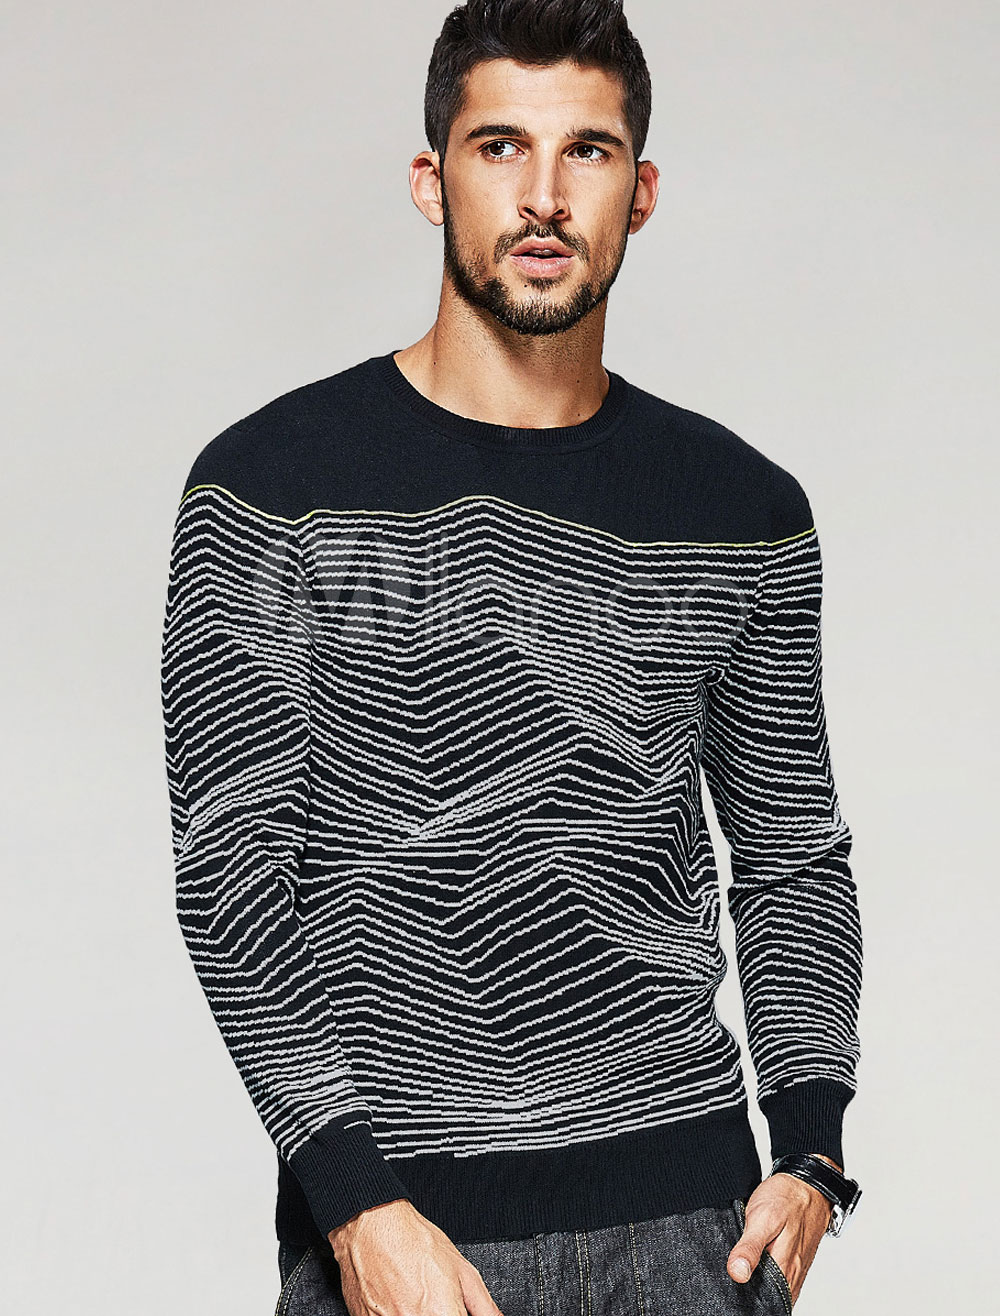 Black Pullover Sweater Striped Round Neck Long Sleeve Slim Fit Knit ...